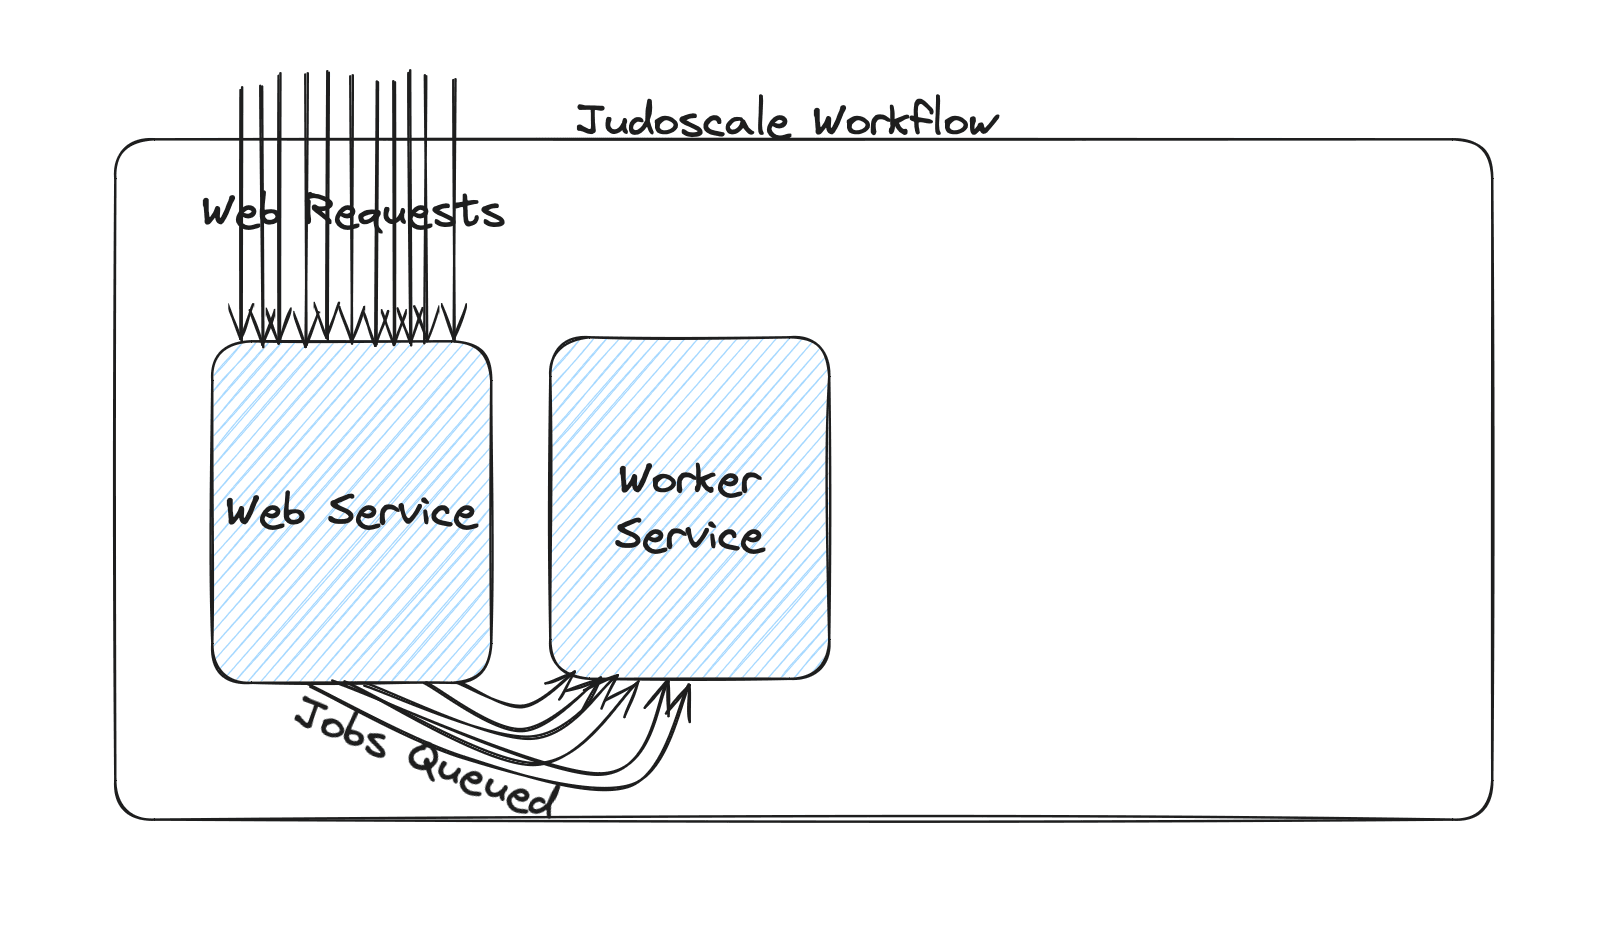 A diagram of an ECS Cluster with a single web service and worker service, each handling requests/jobs